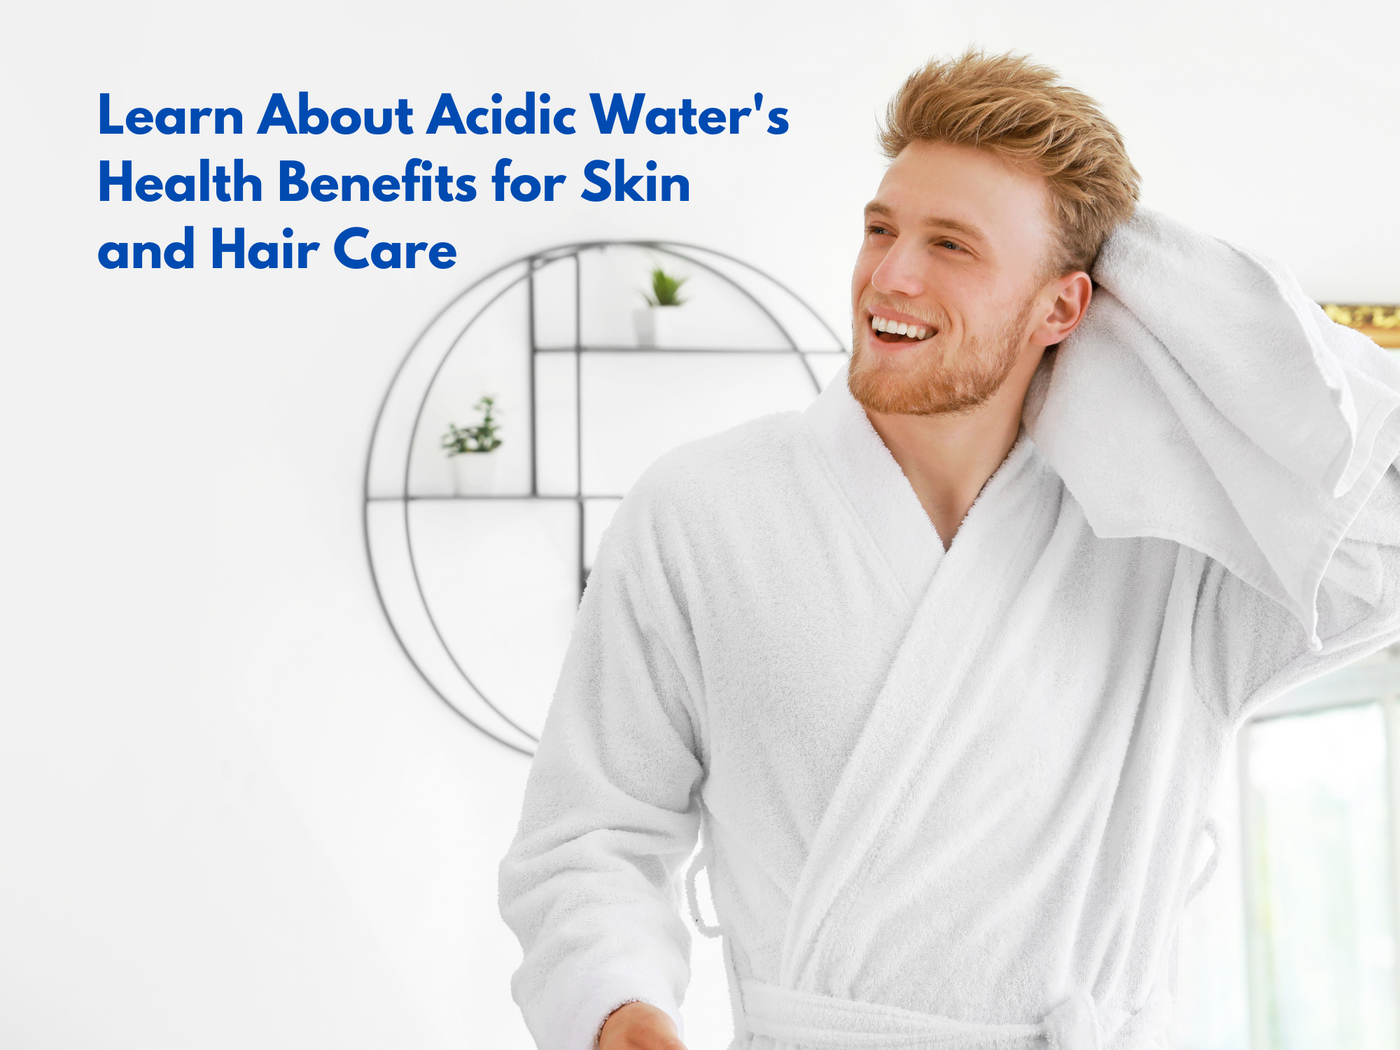 Learn about Acidic Water's Health Benefits for Skin and Hair Care